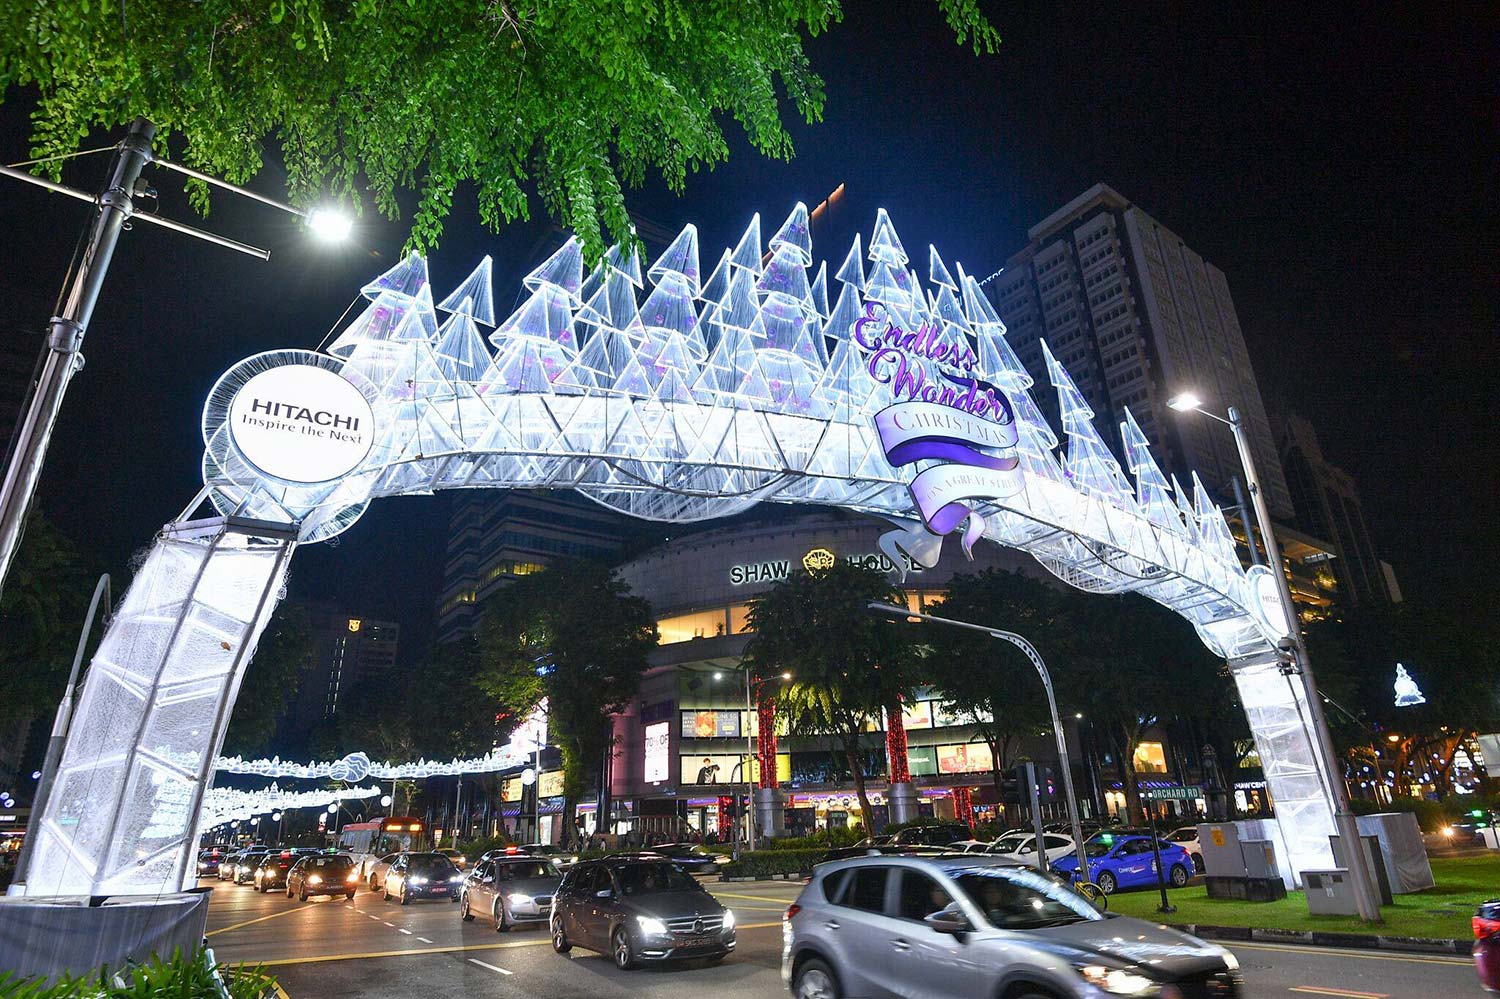 Christmas of Endless Wonder on Orchard Road